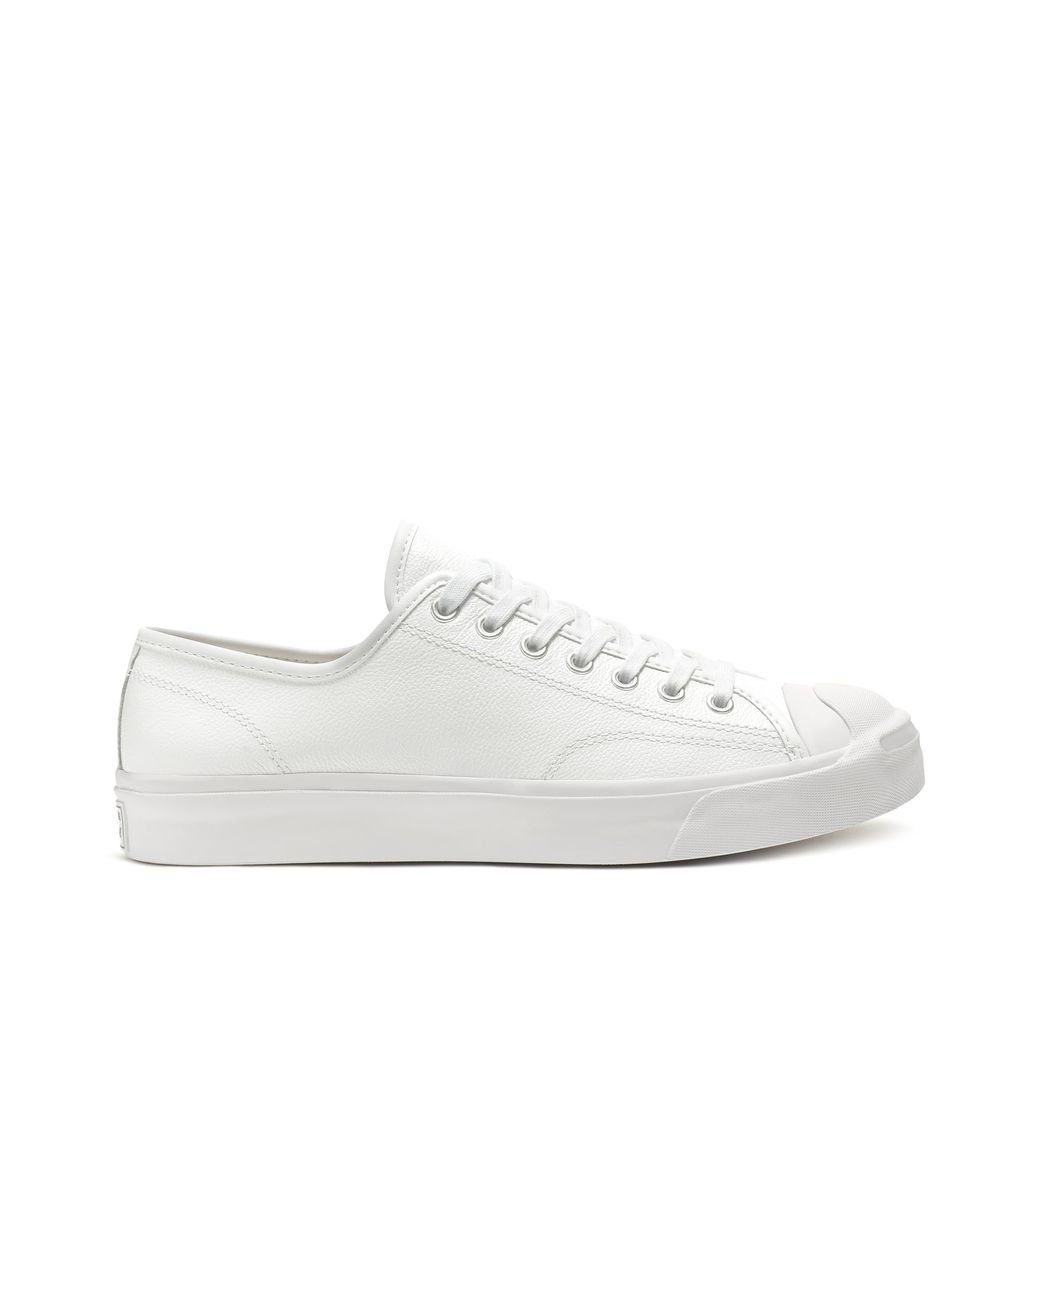 converse jack purcell tumbled leather